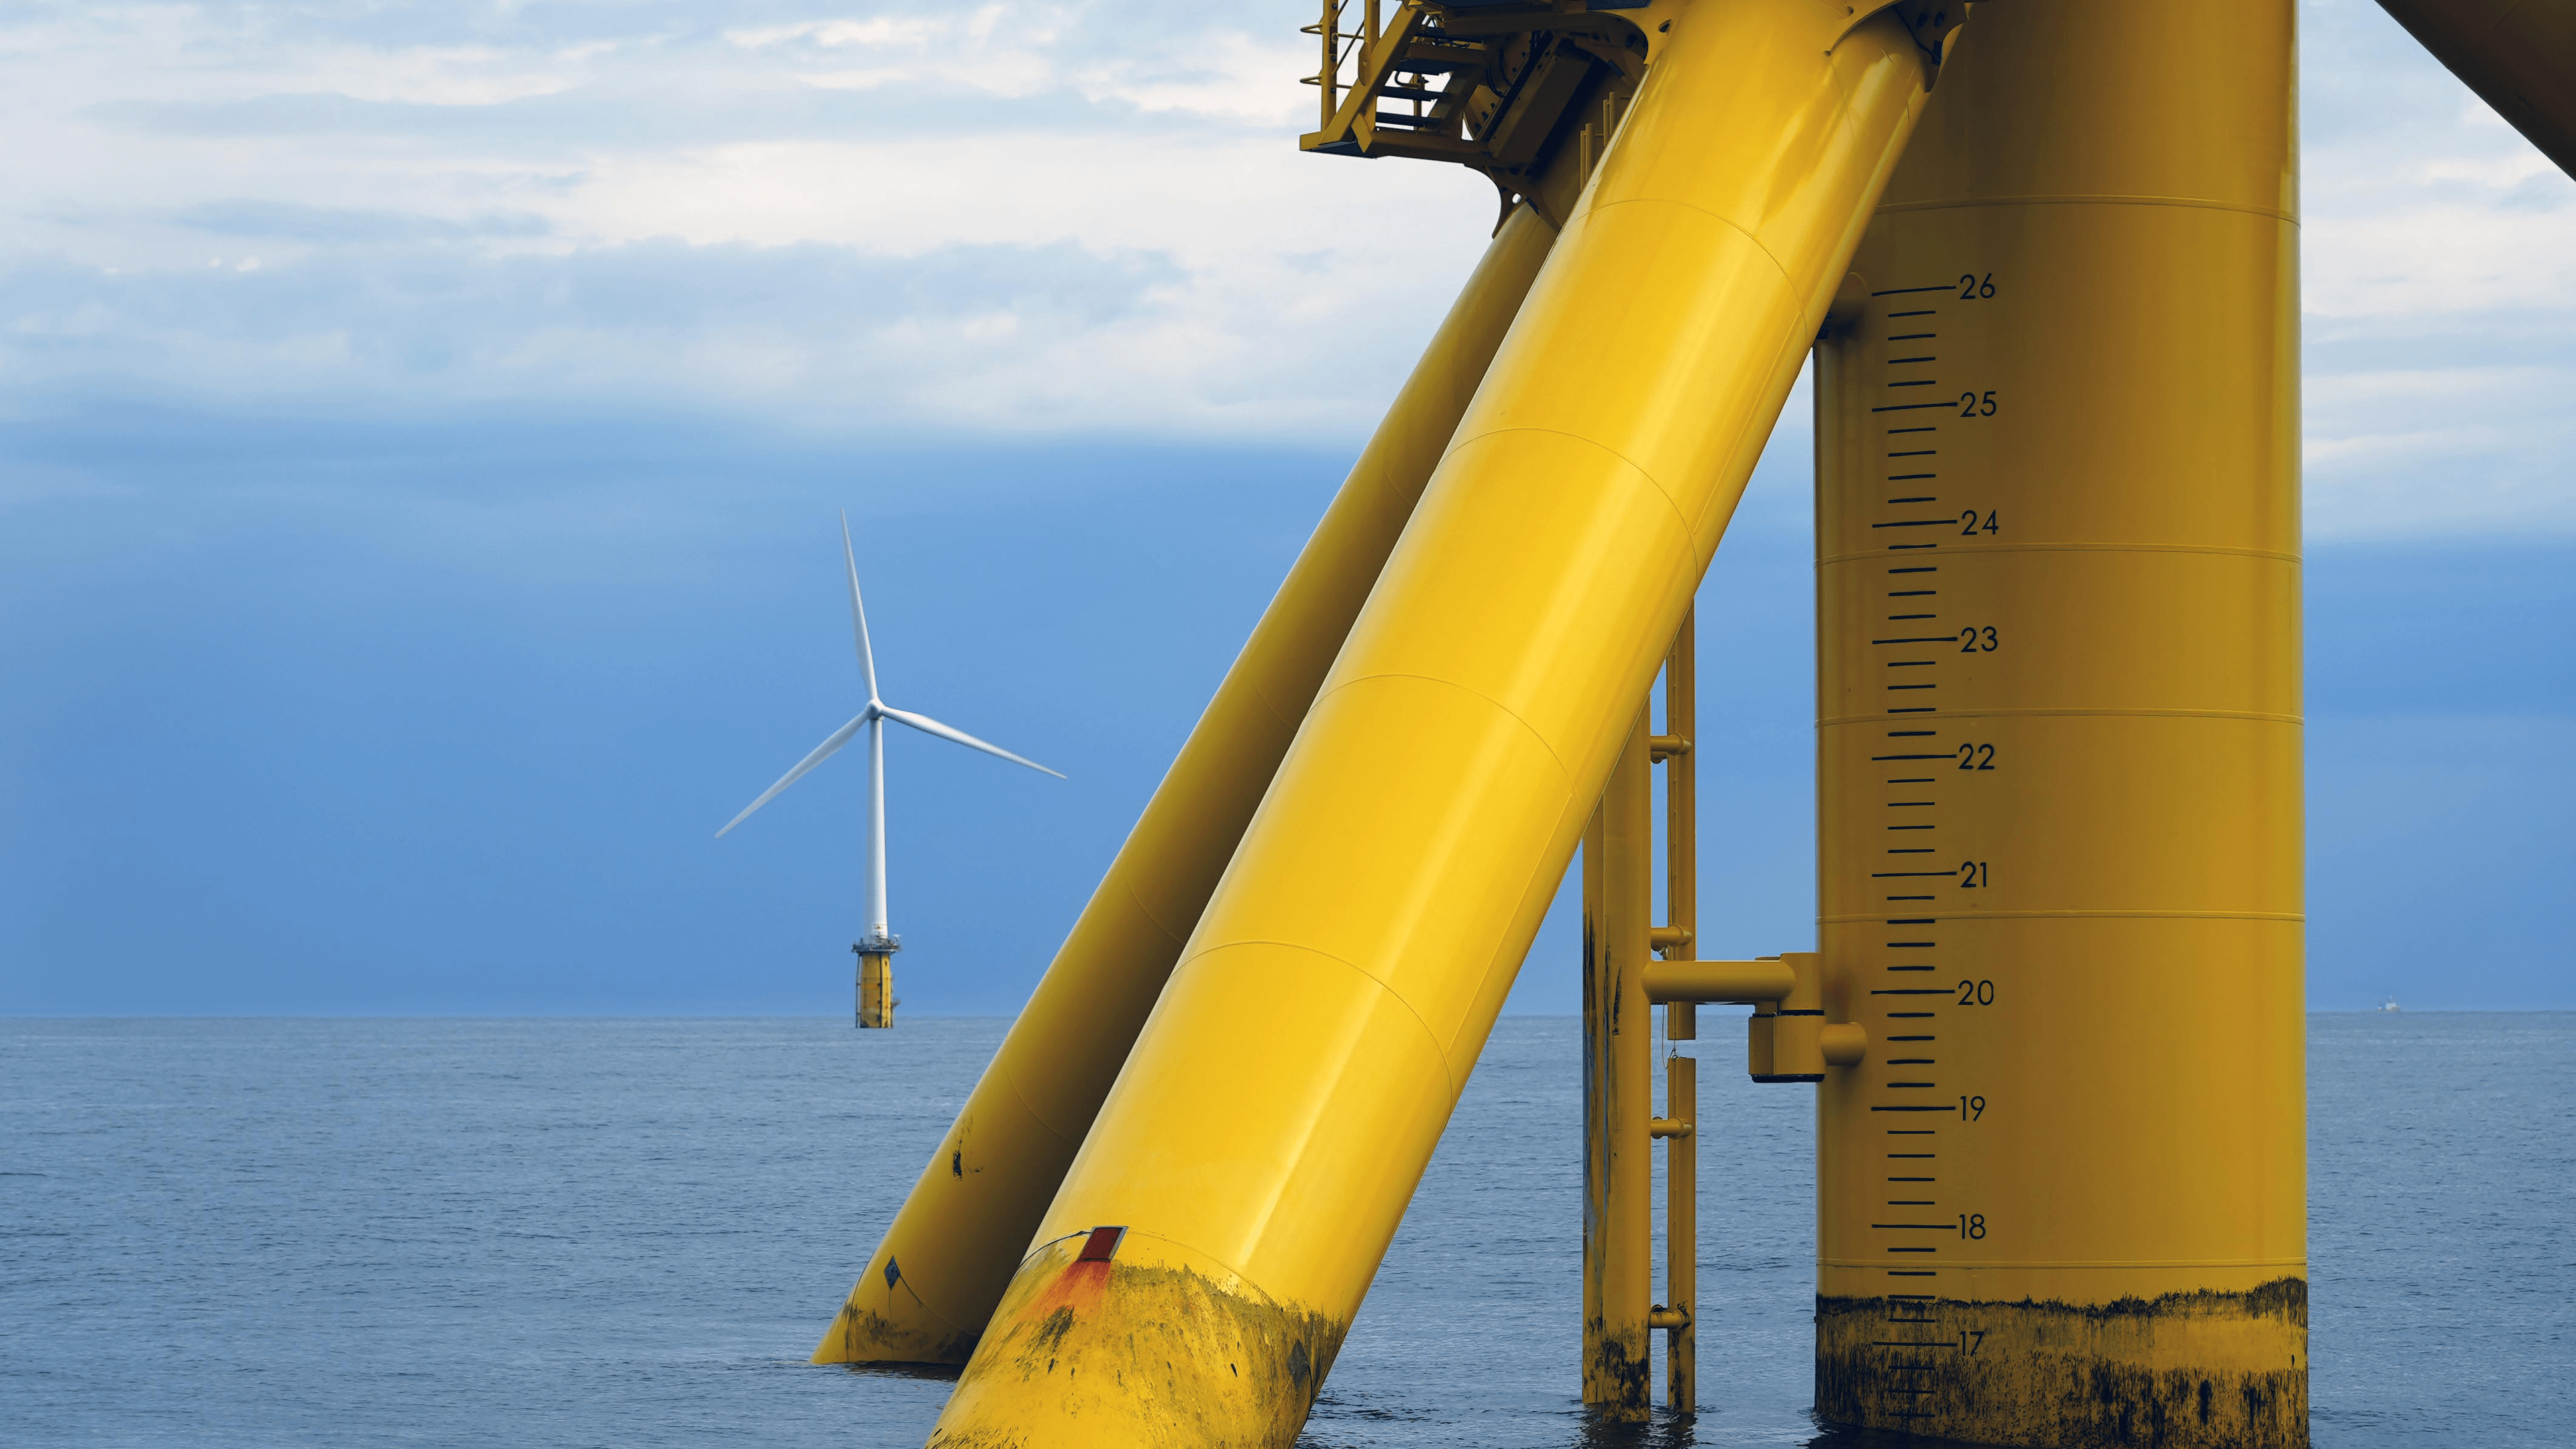 A photo of an offshore wind mill on the sea